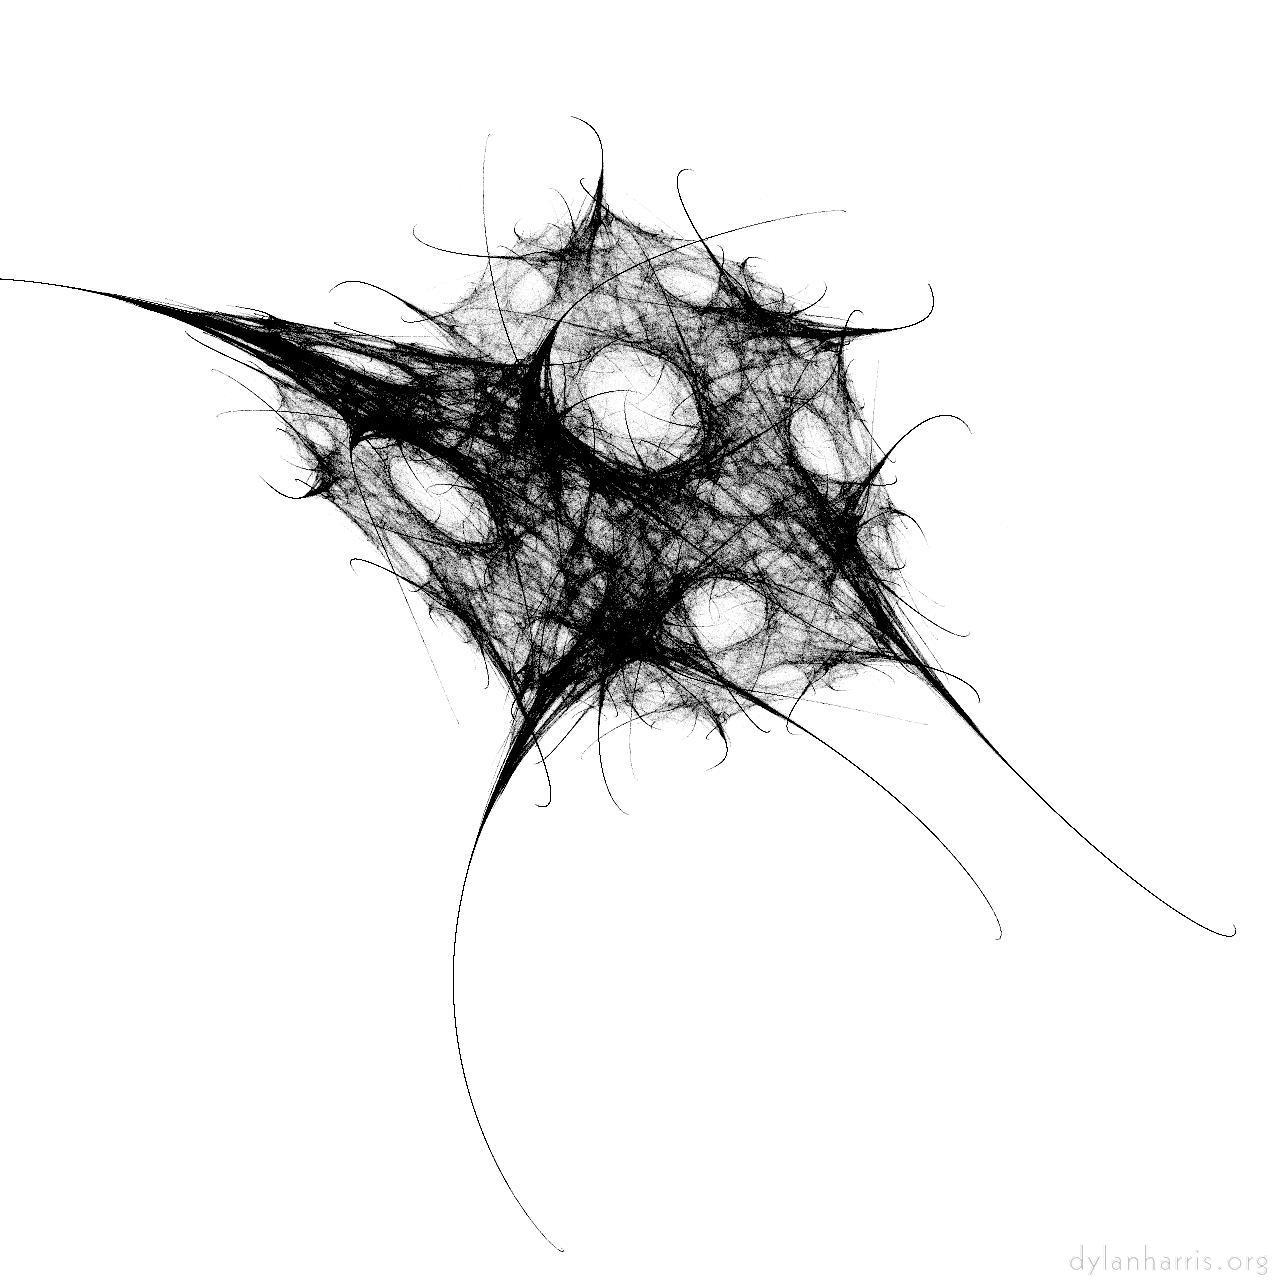 bw attractor :: bw attractor 2